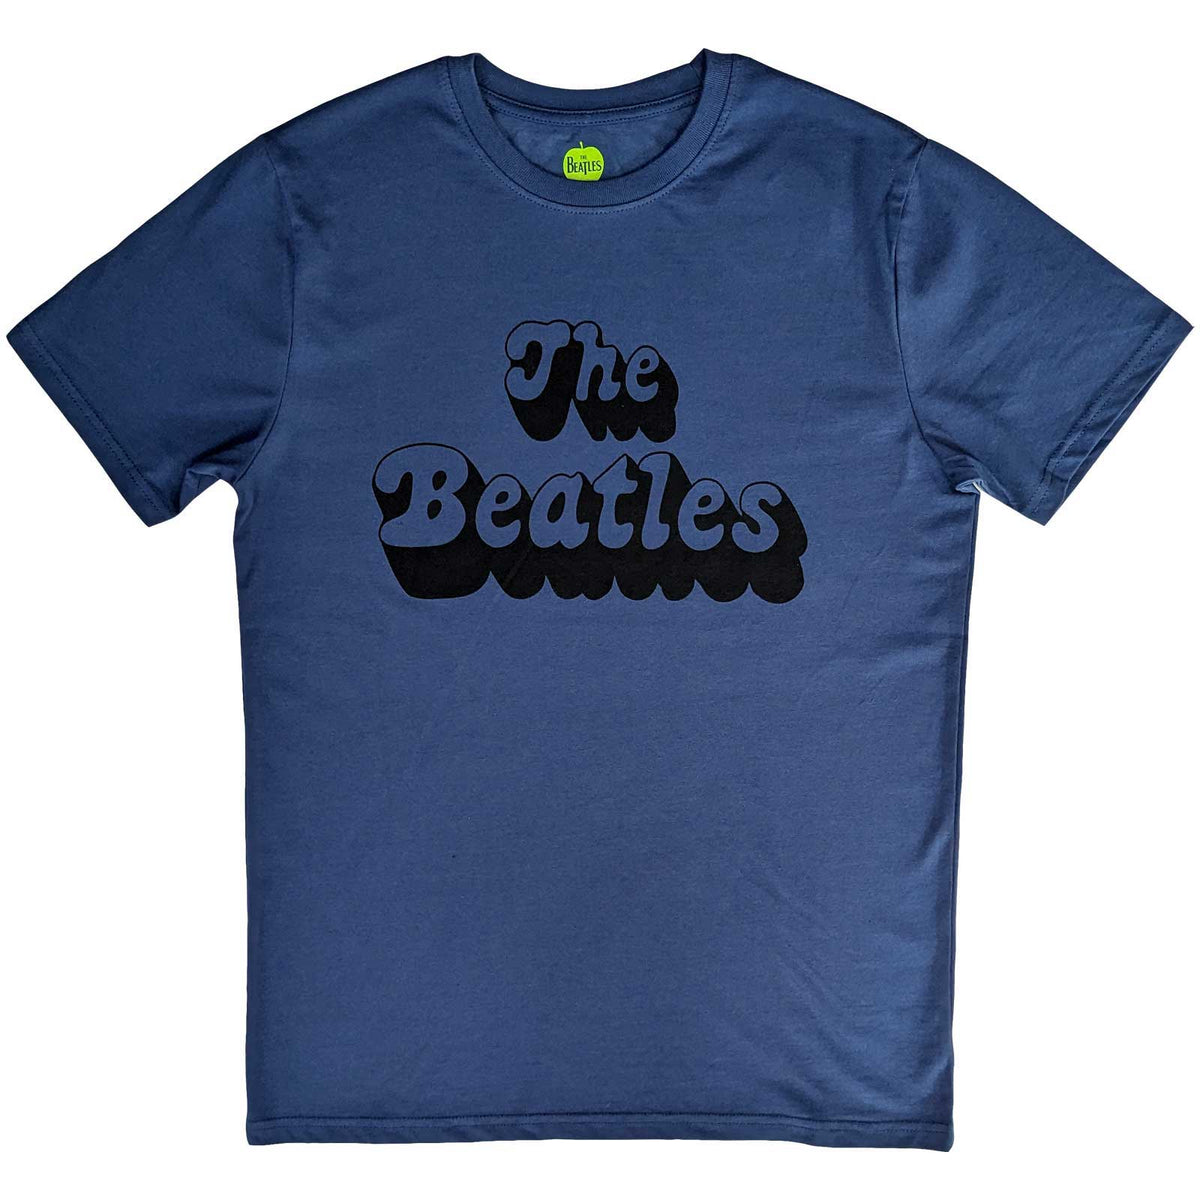 The Beatles T-Shirt - Text Logo Shadow - Blue Unisex Official Licensed Design